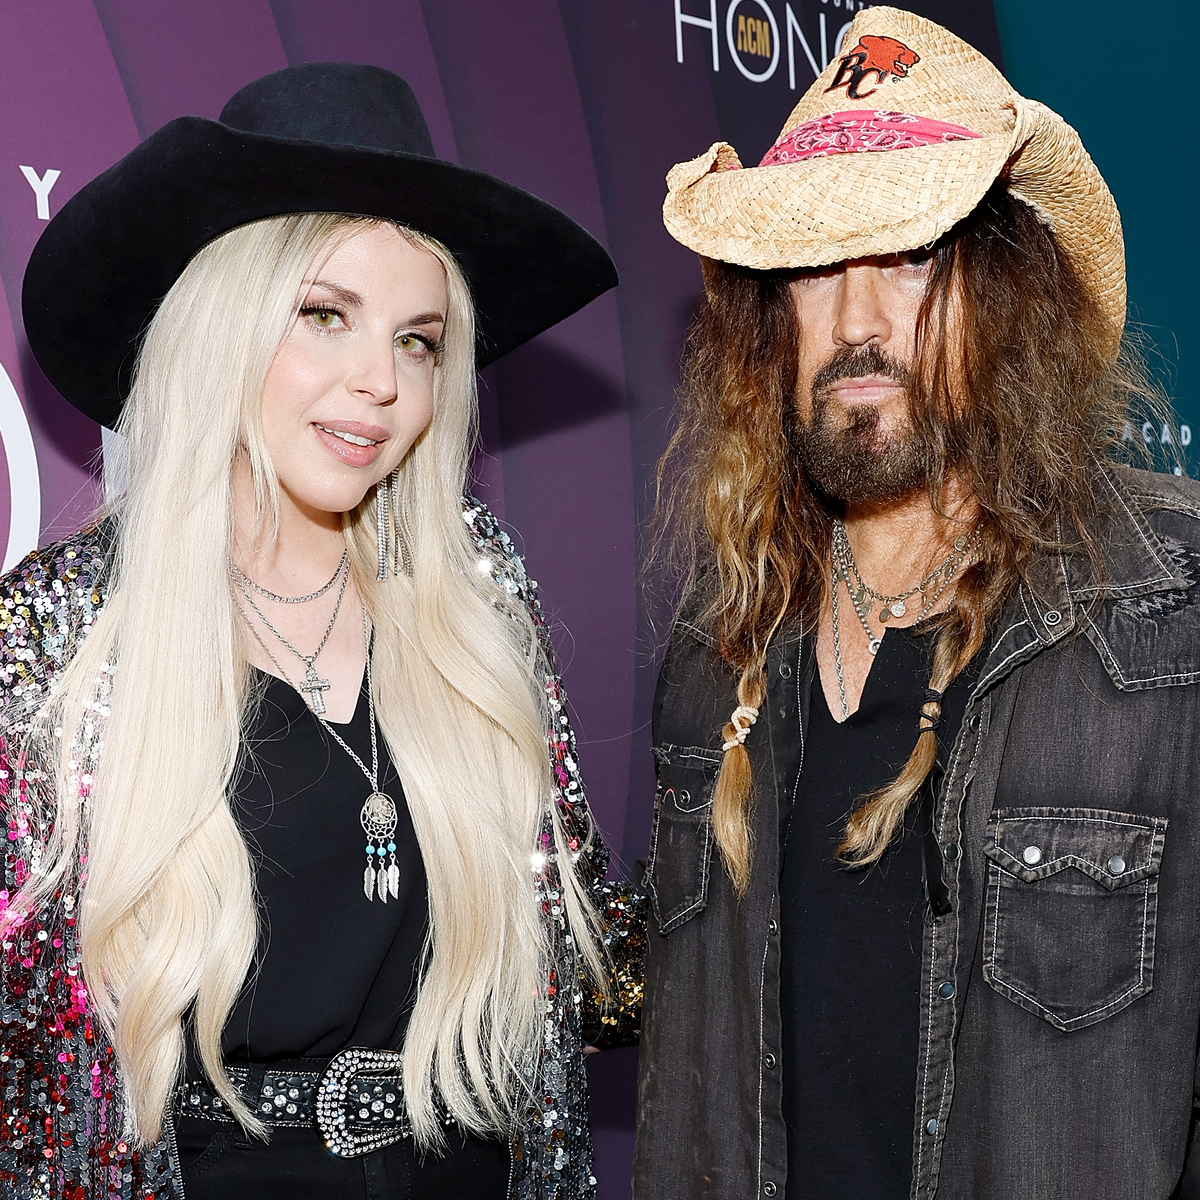 Billy Ray Cyrus' Ex Firerose Speaks Out After Audio Release